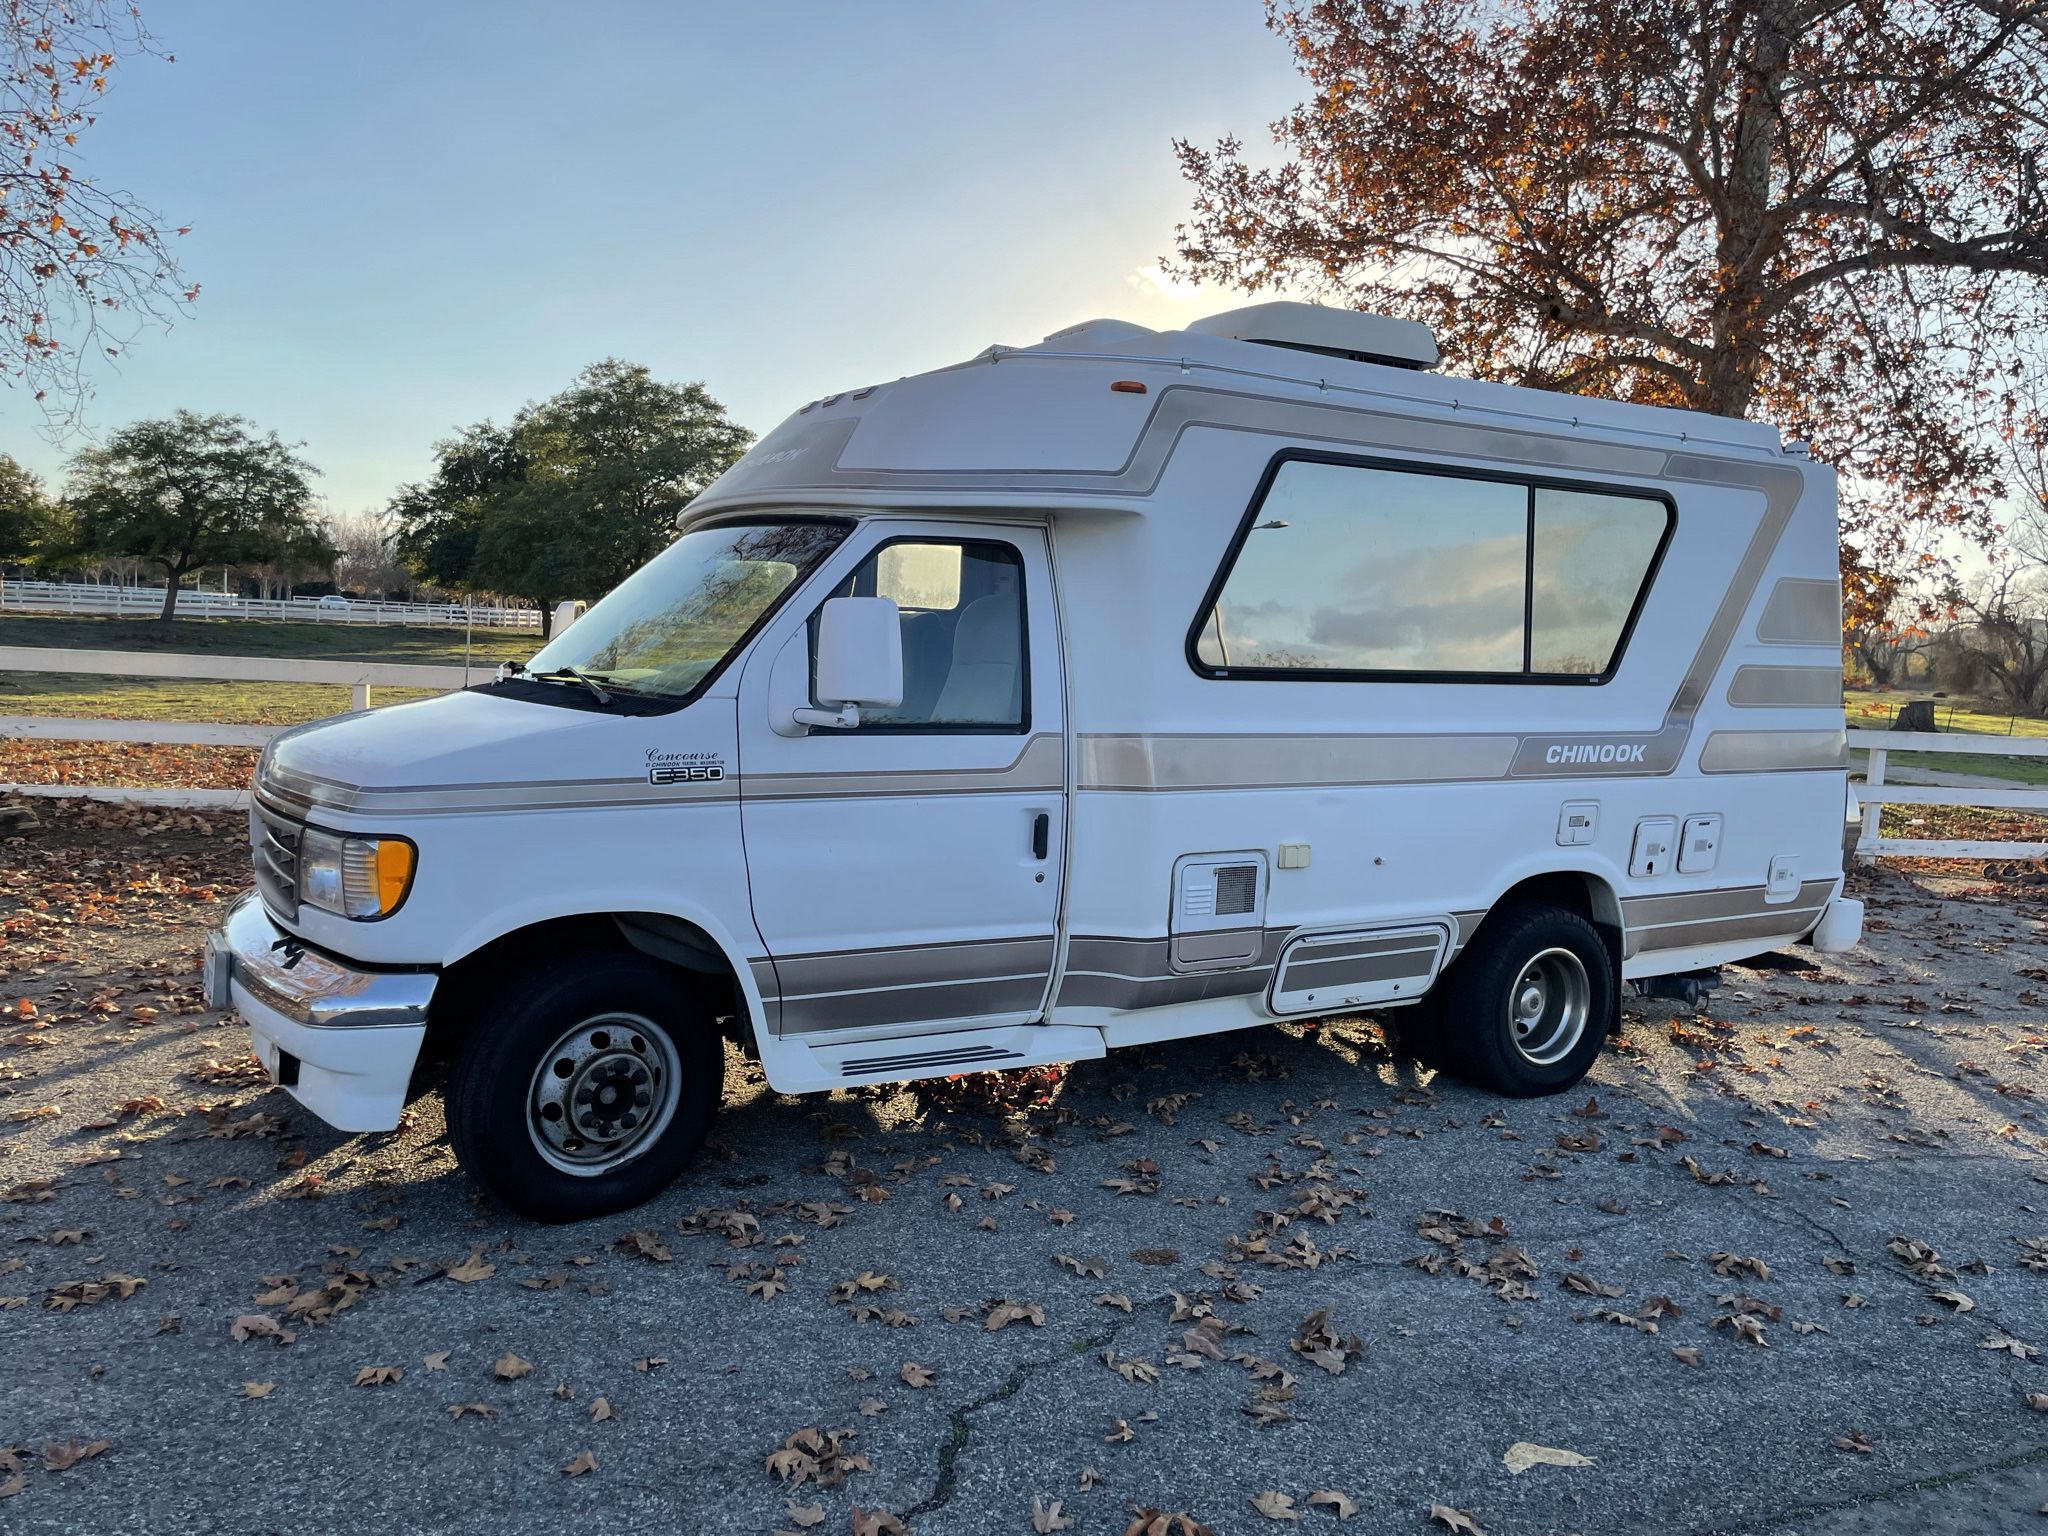 1996 Ford Chinook For In Riverside Ca Offerup